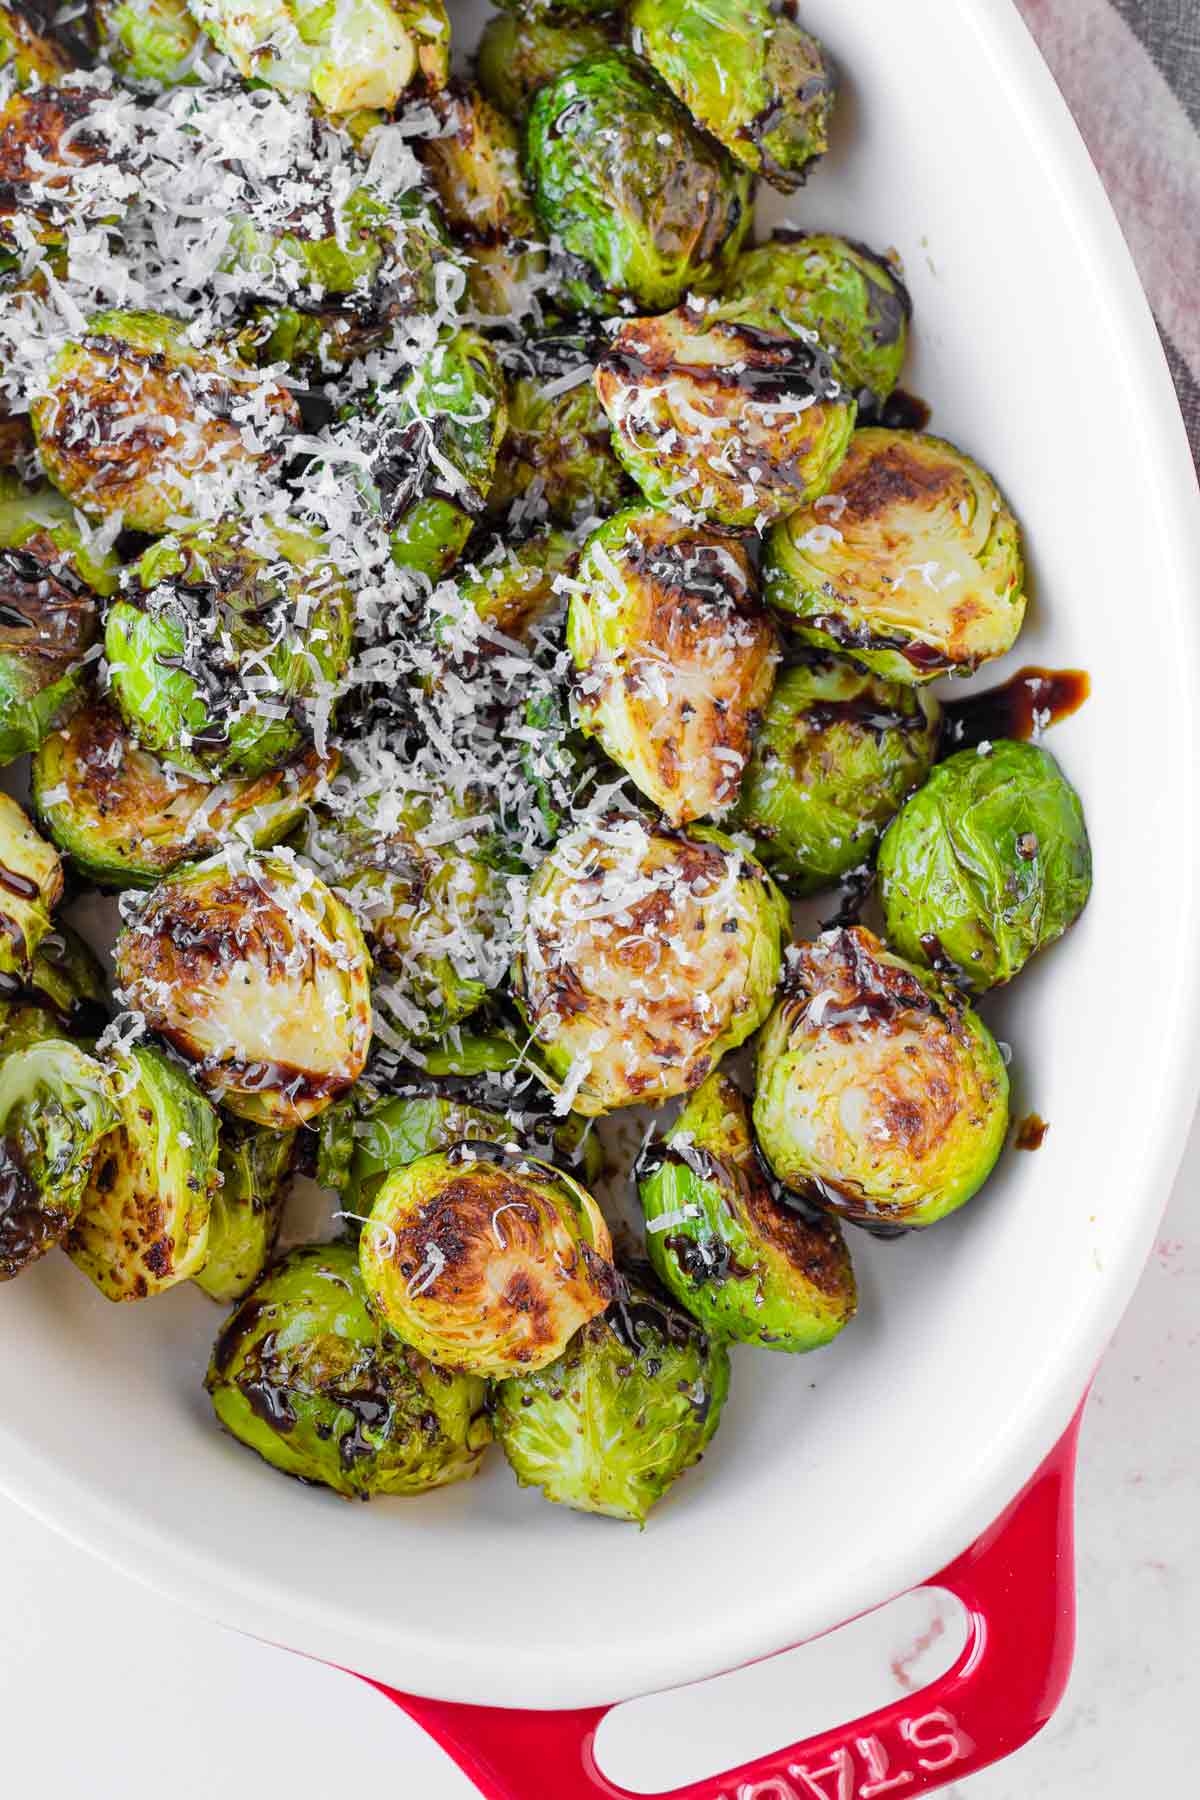 roasted brussels sprouts with balsamic glaze in oval dish